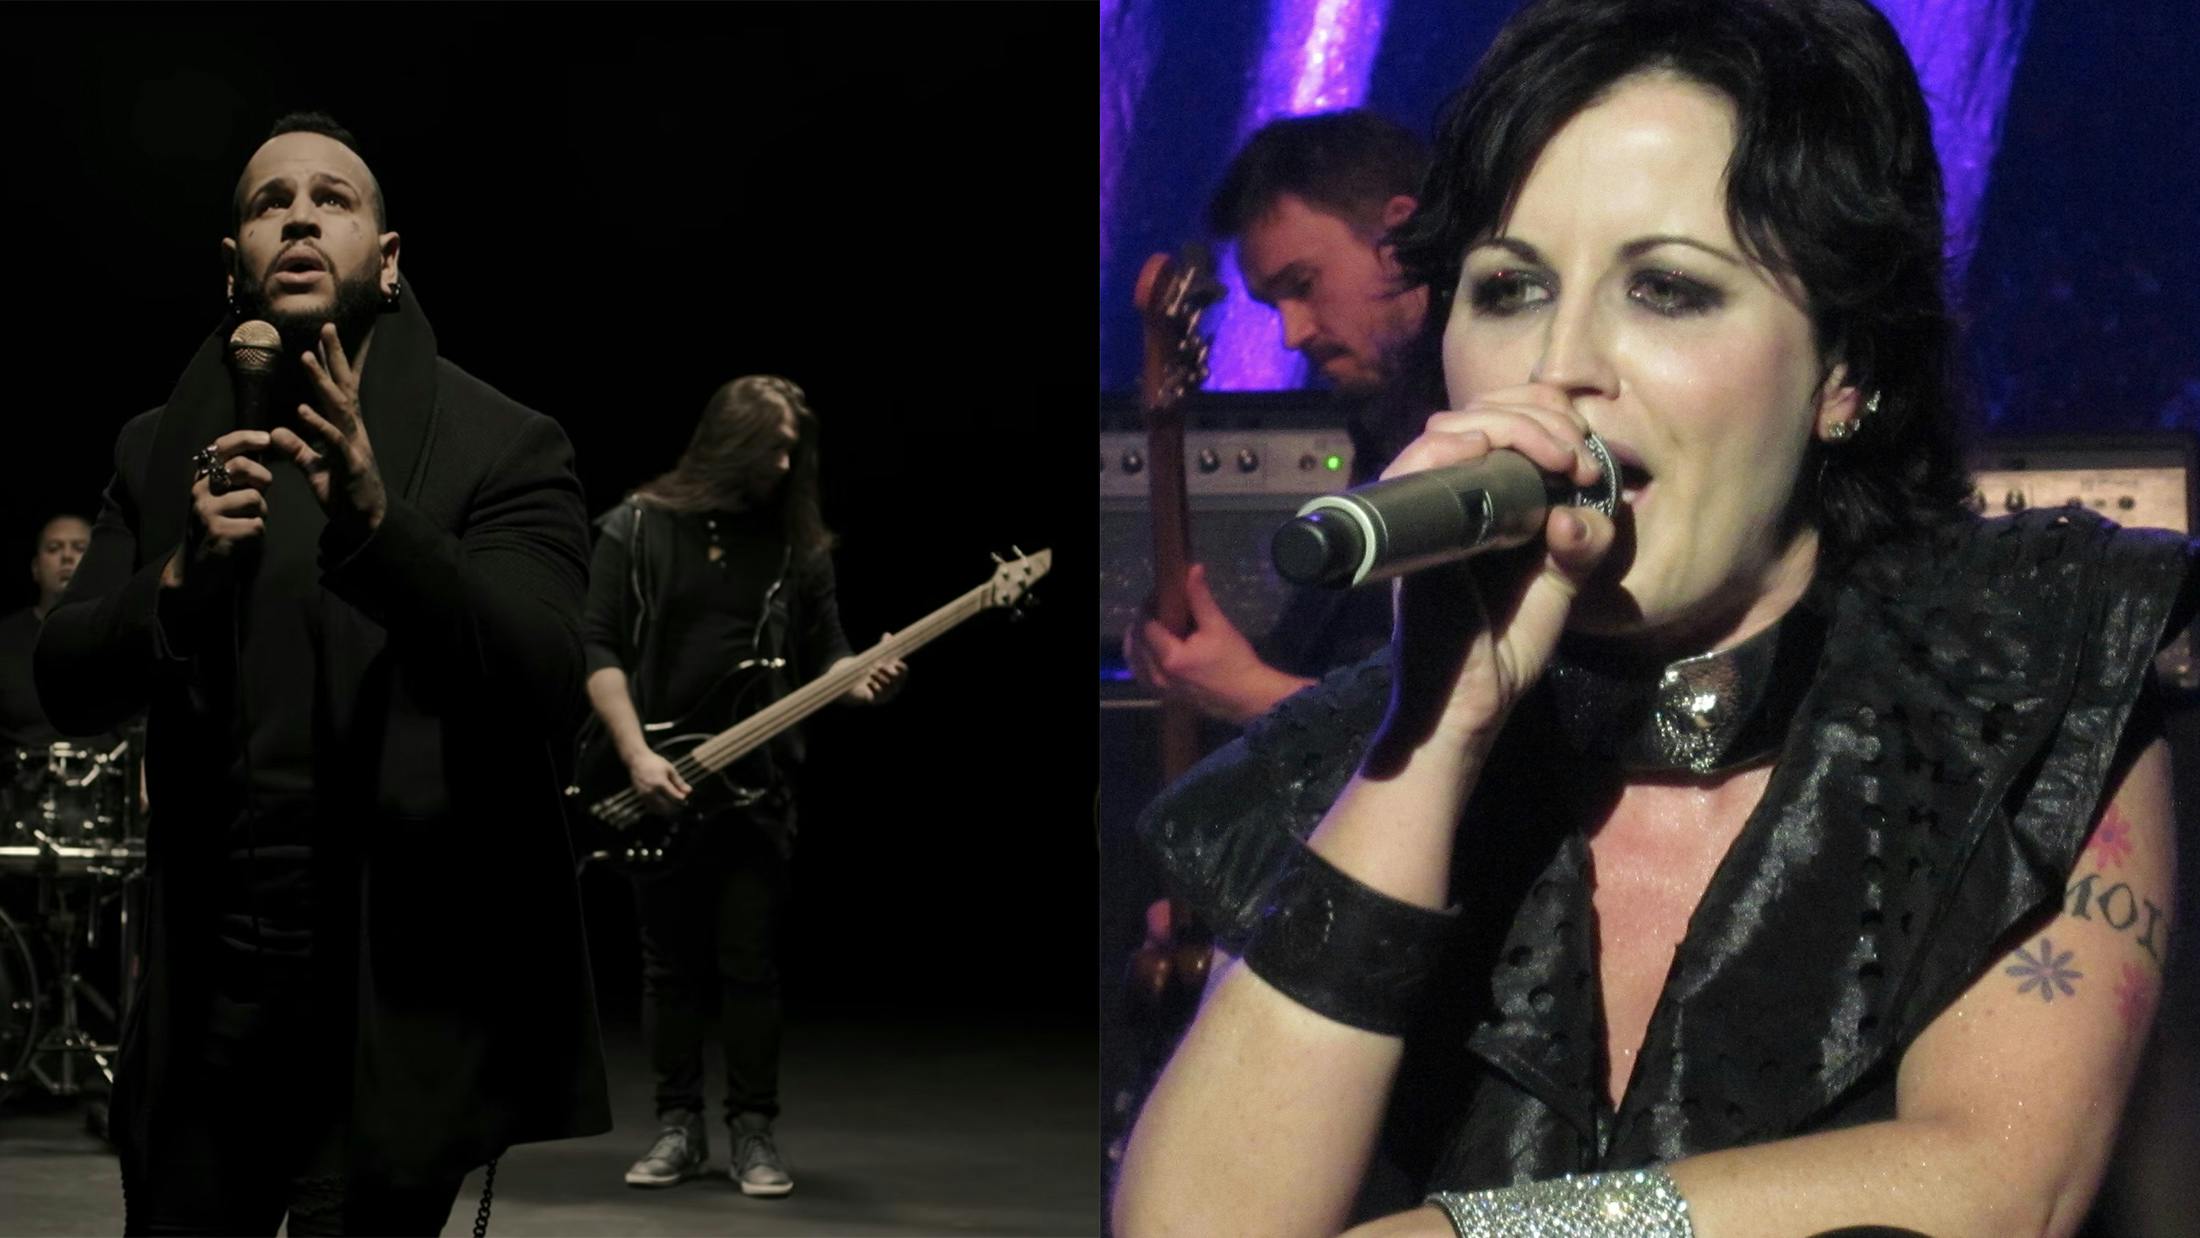 Bad Wolves Donate $250,000 To The Family Of Late Cranberries Vocalist Dolores O’Riordan